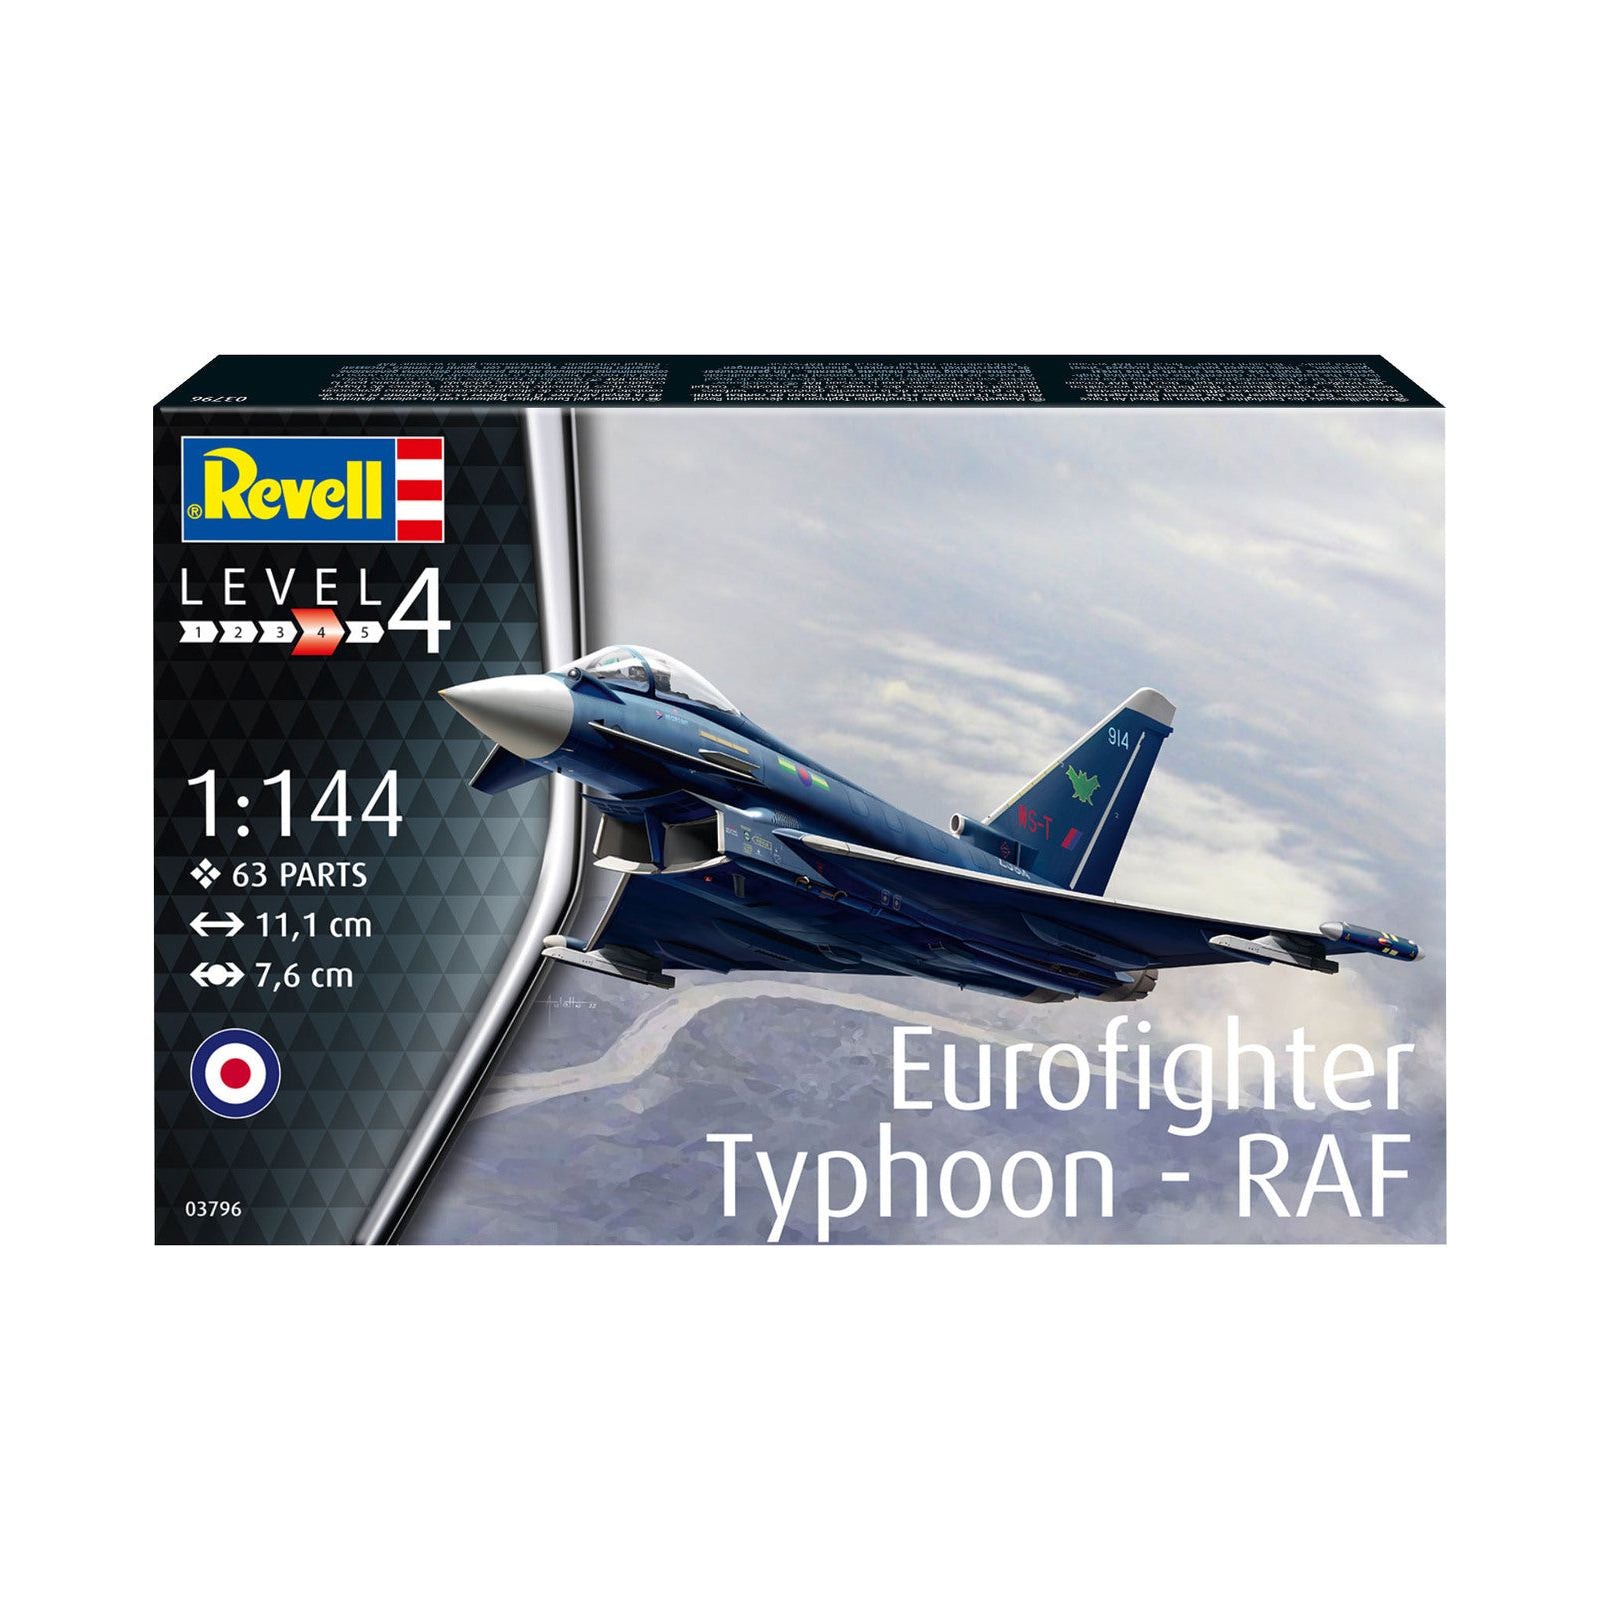 REVELL 1/144 Scale Eurofighter Typhoon - RAF